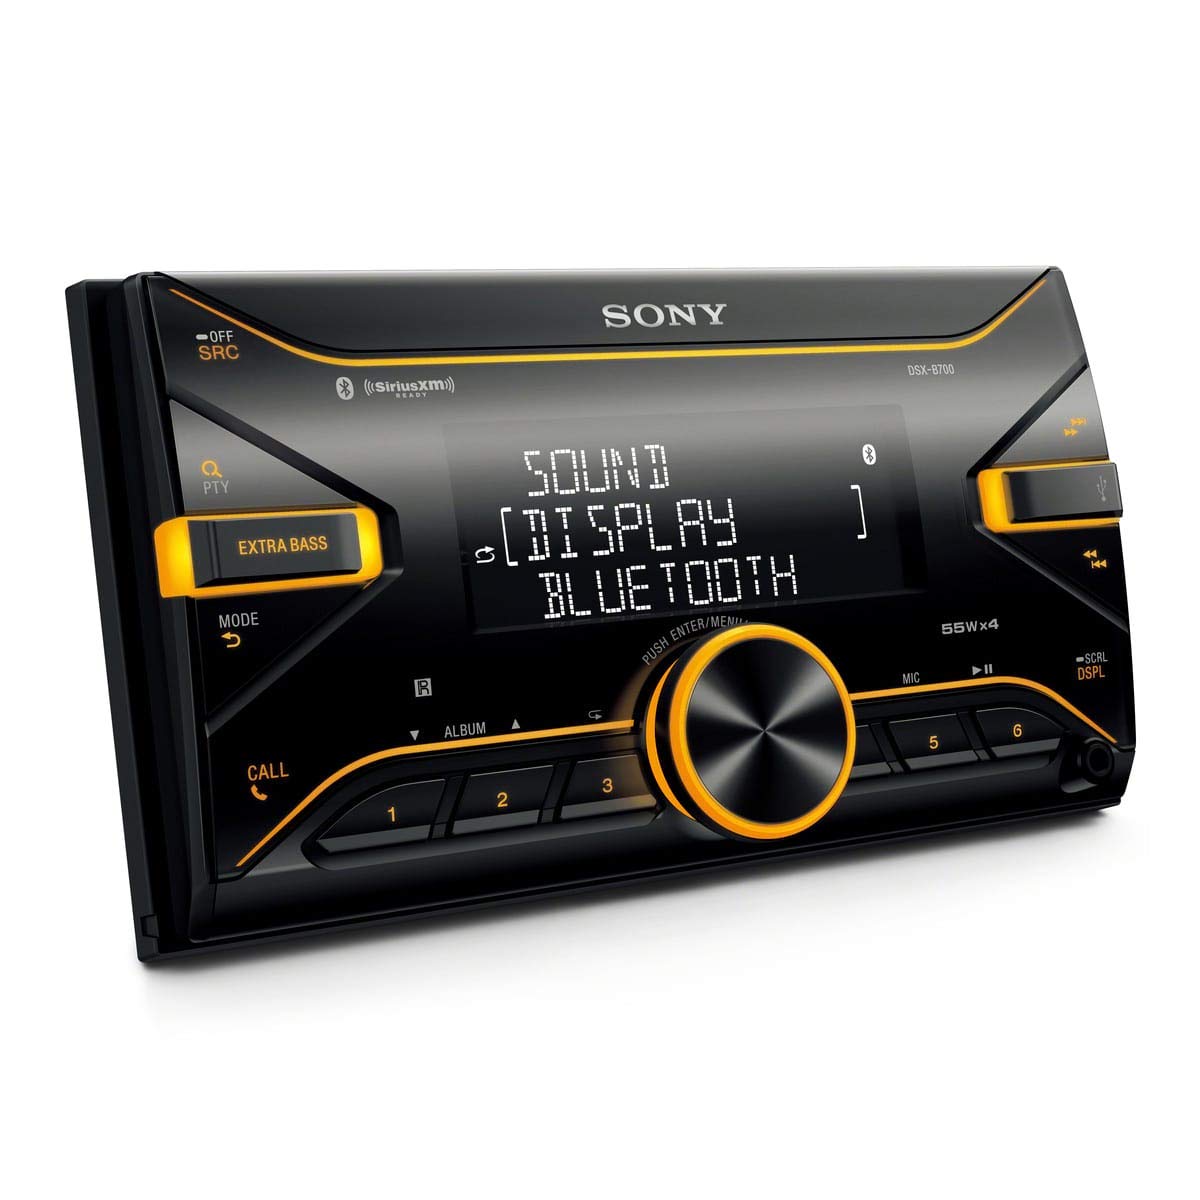 Sony Dsx-B700 Media Receiver with Bluetooth Technology